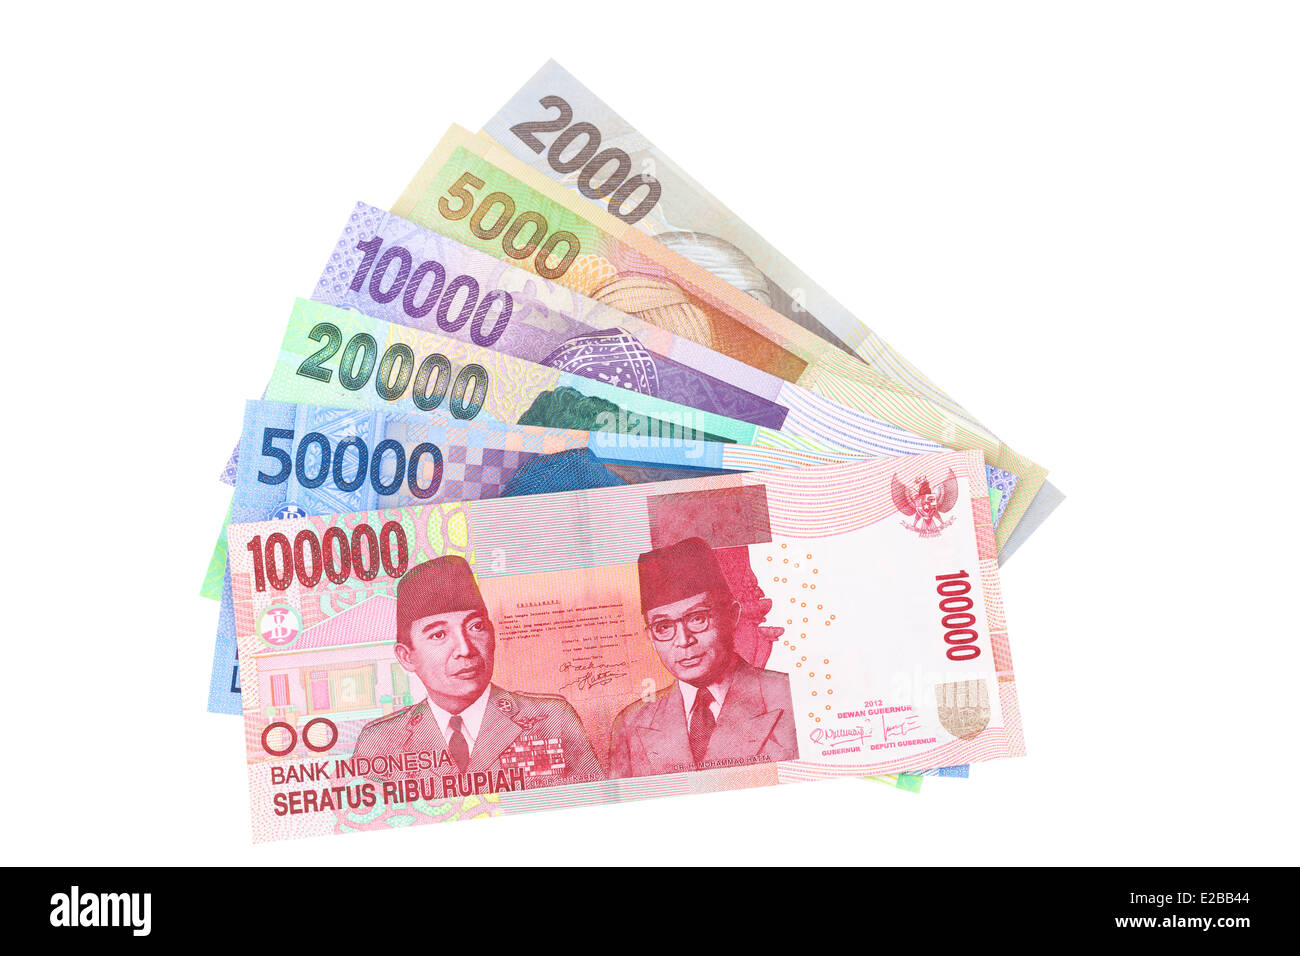 Indonesian banknotes in various denominations Stock Photo